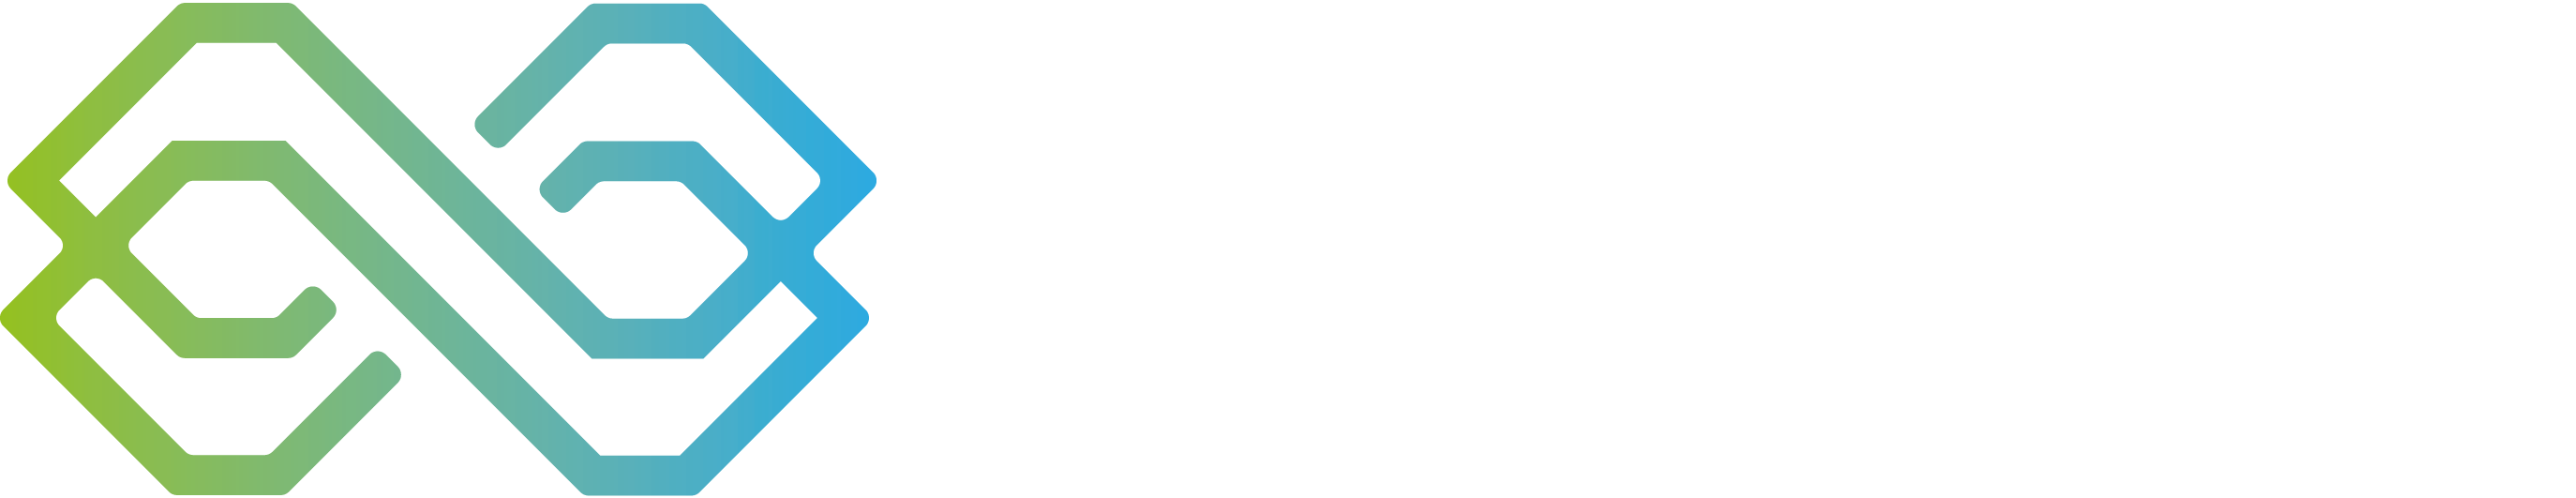 Gronover Consulting GmbH logo